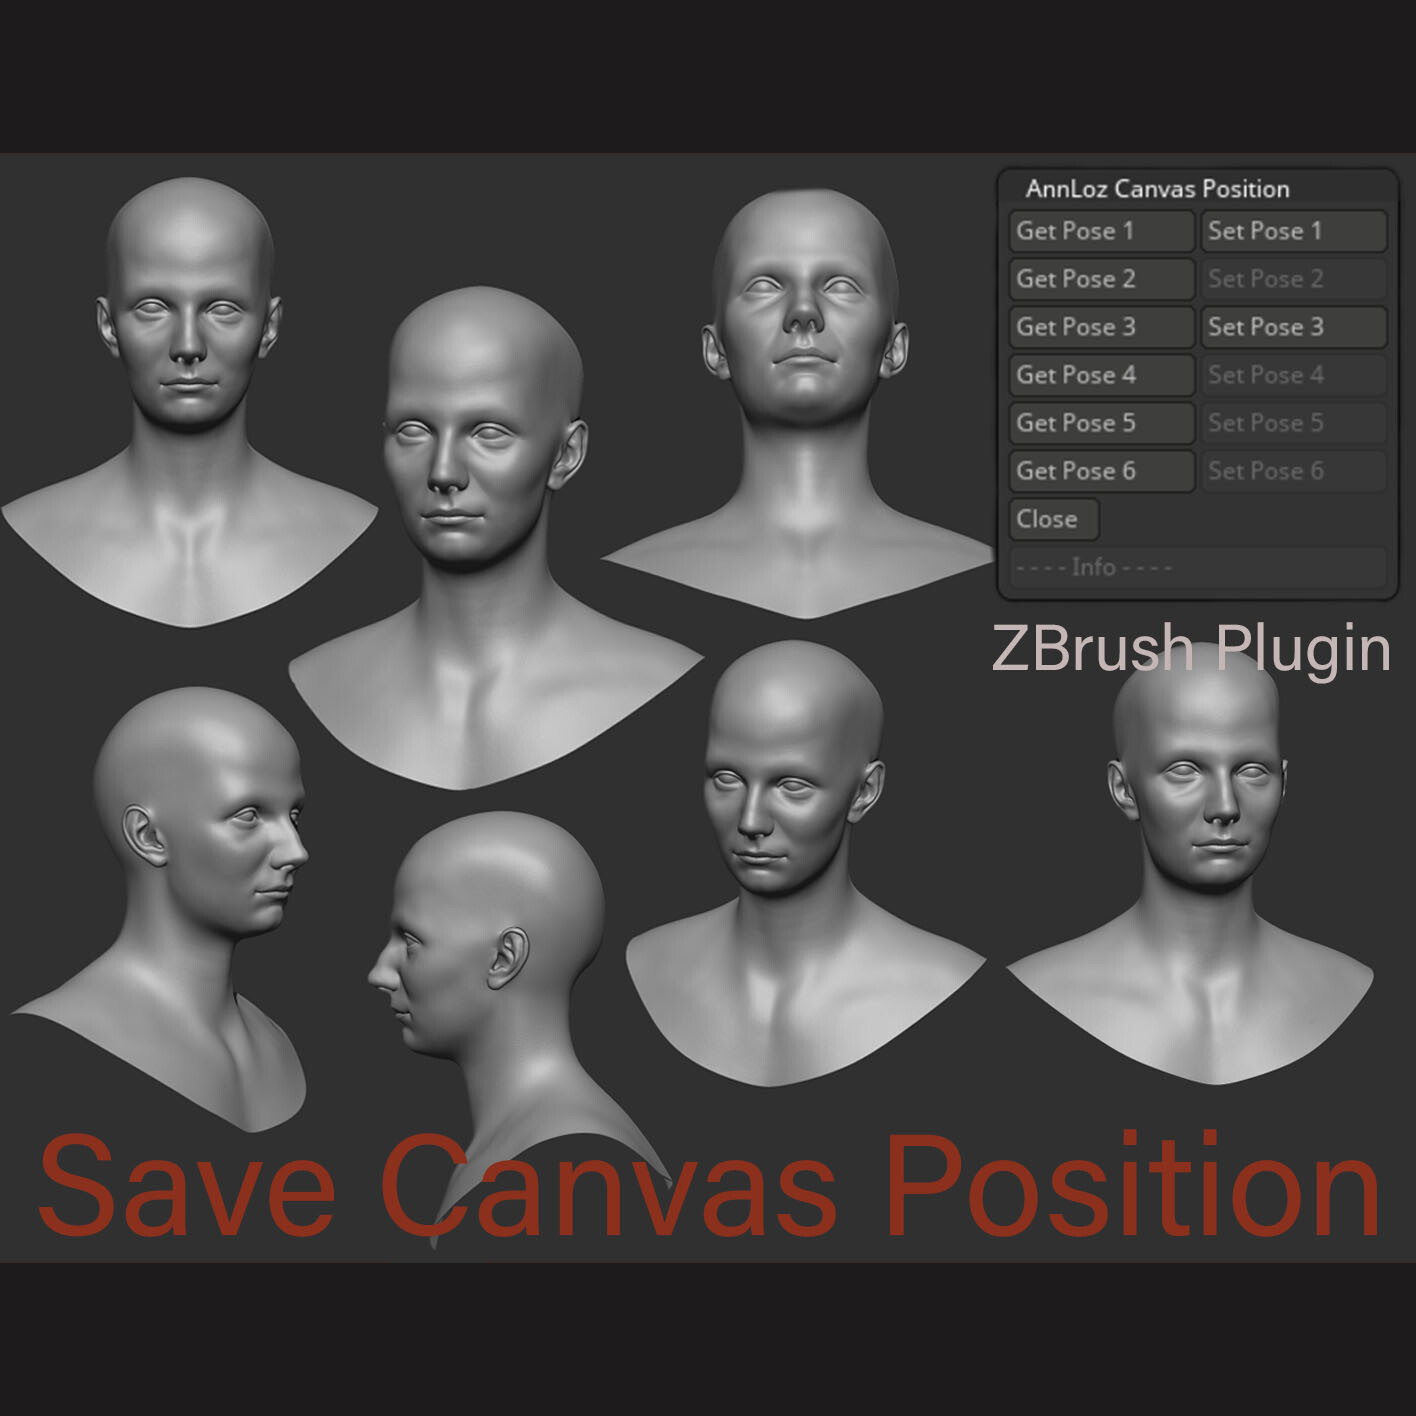 how to make zbrush canvas bigger